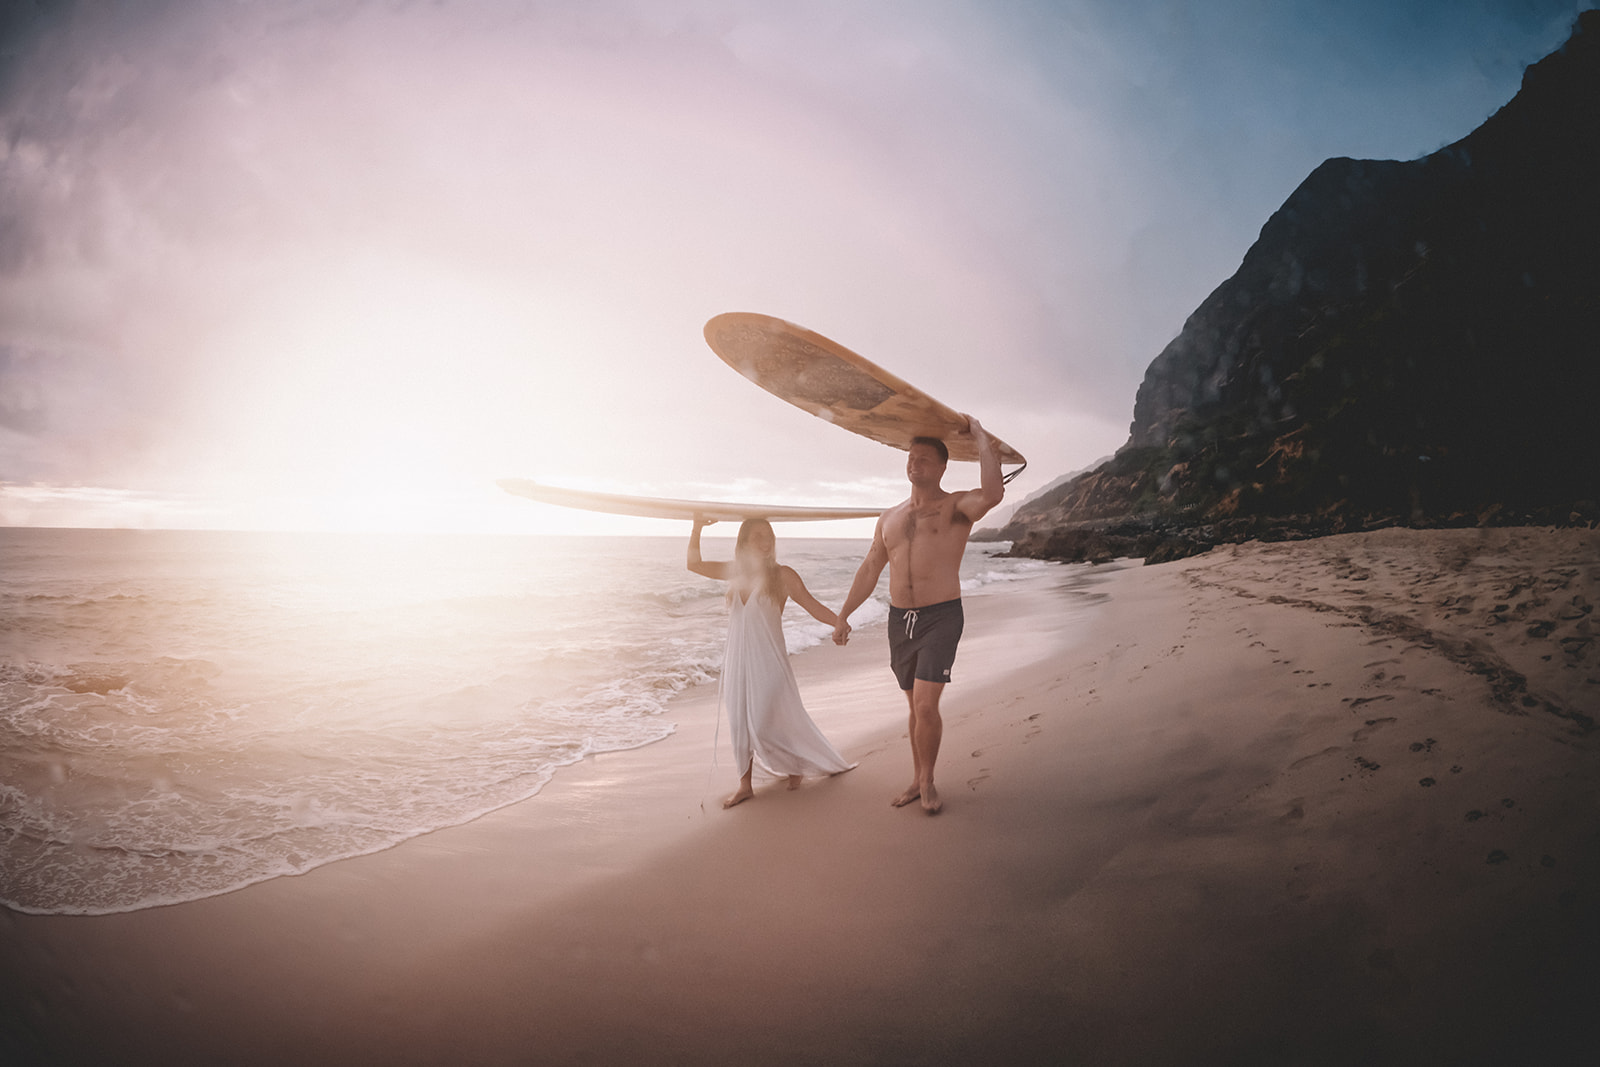 Underwater Couples Engagement Surfboard photos at Makua Beach on Oahu, Hawaii